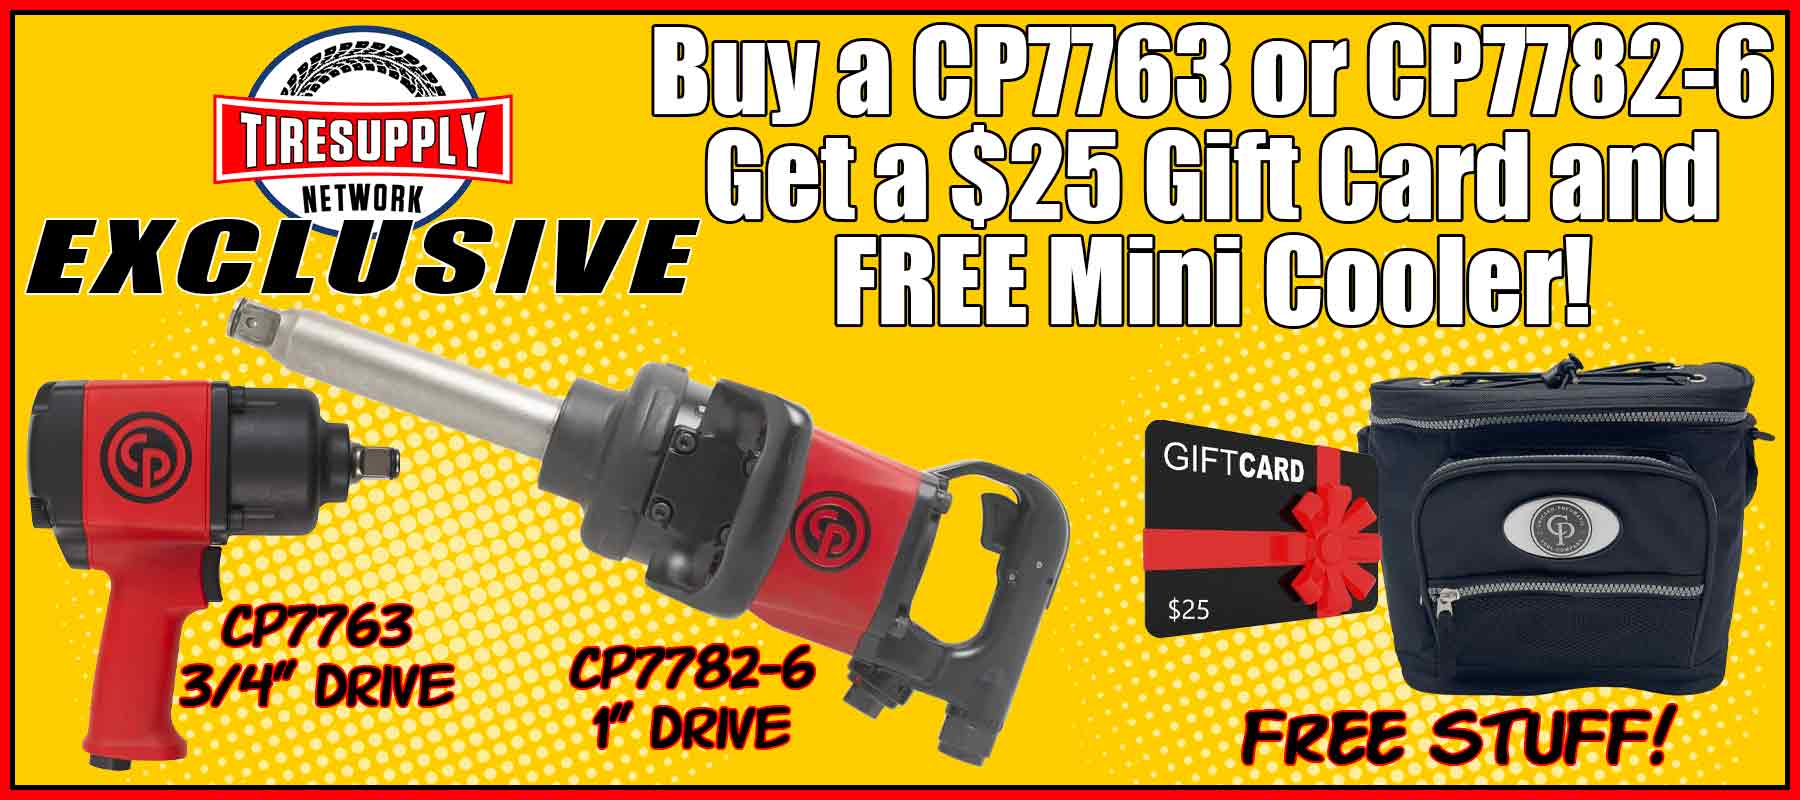 Buy a Chicago Pneumatic CP7763 or CP7782-6 Impact Wrench and Get a $25 Gift Card & FREE Mini Cooler!